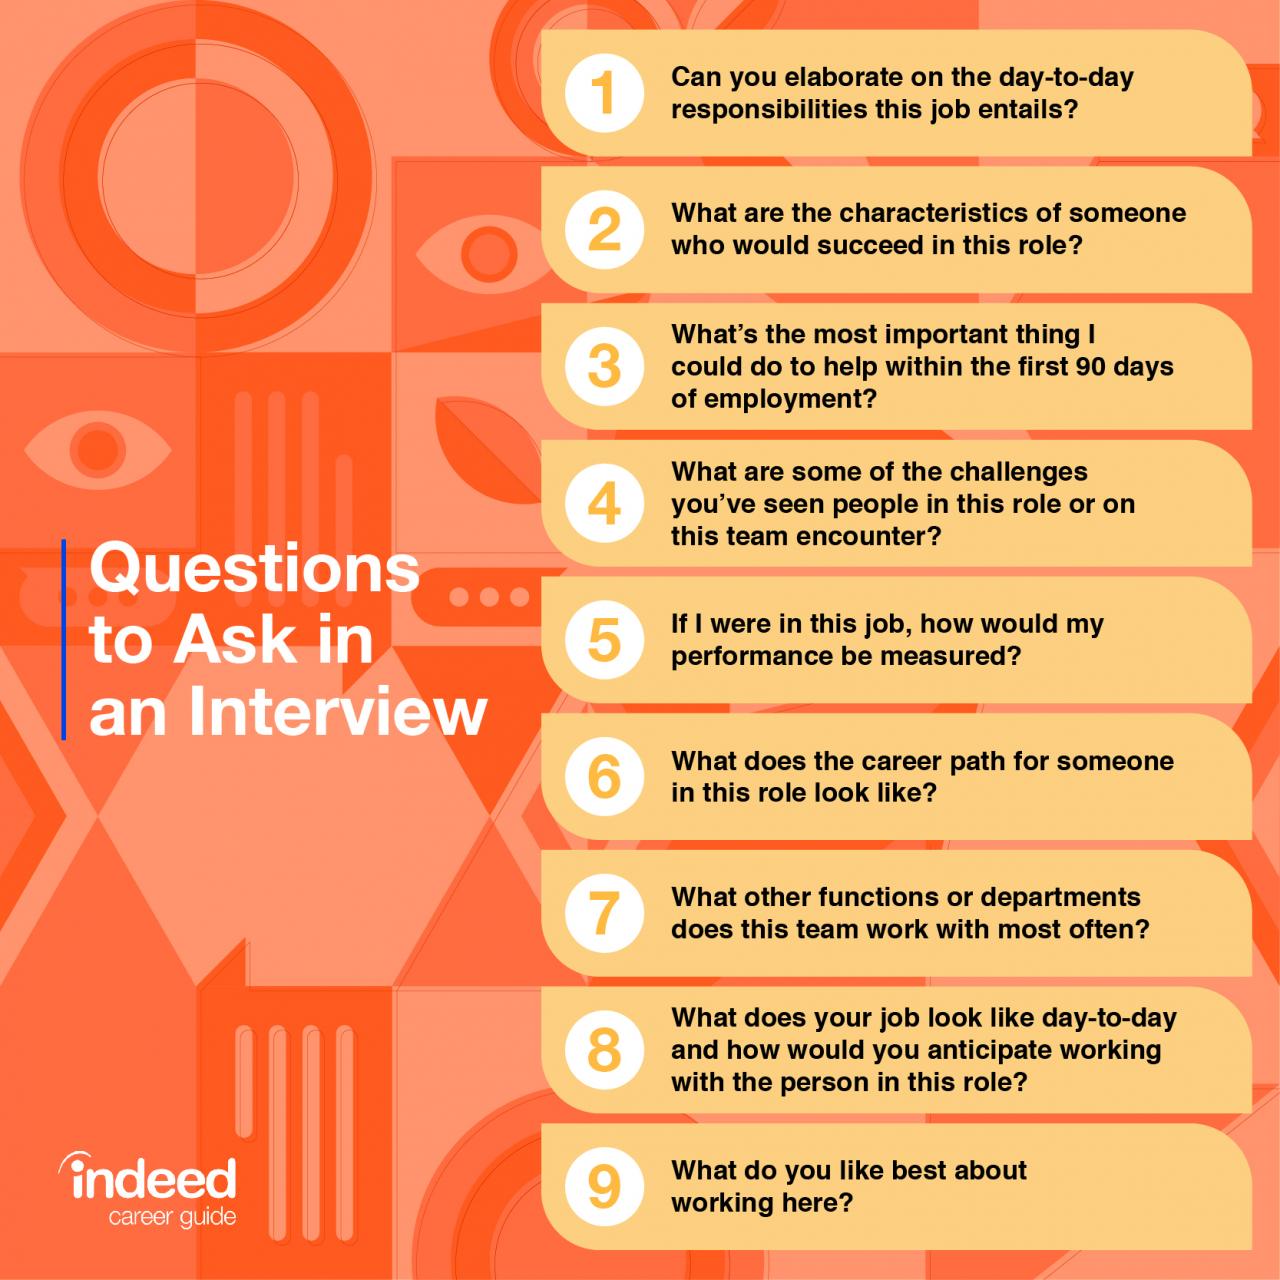 Good questions to ask companies in an interview